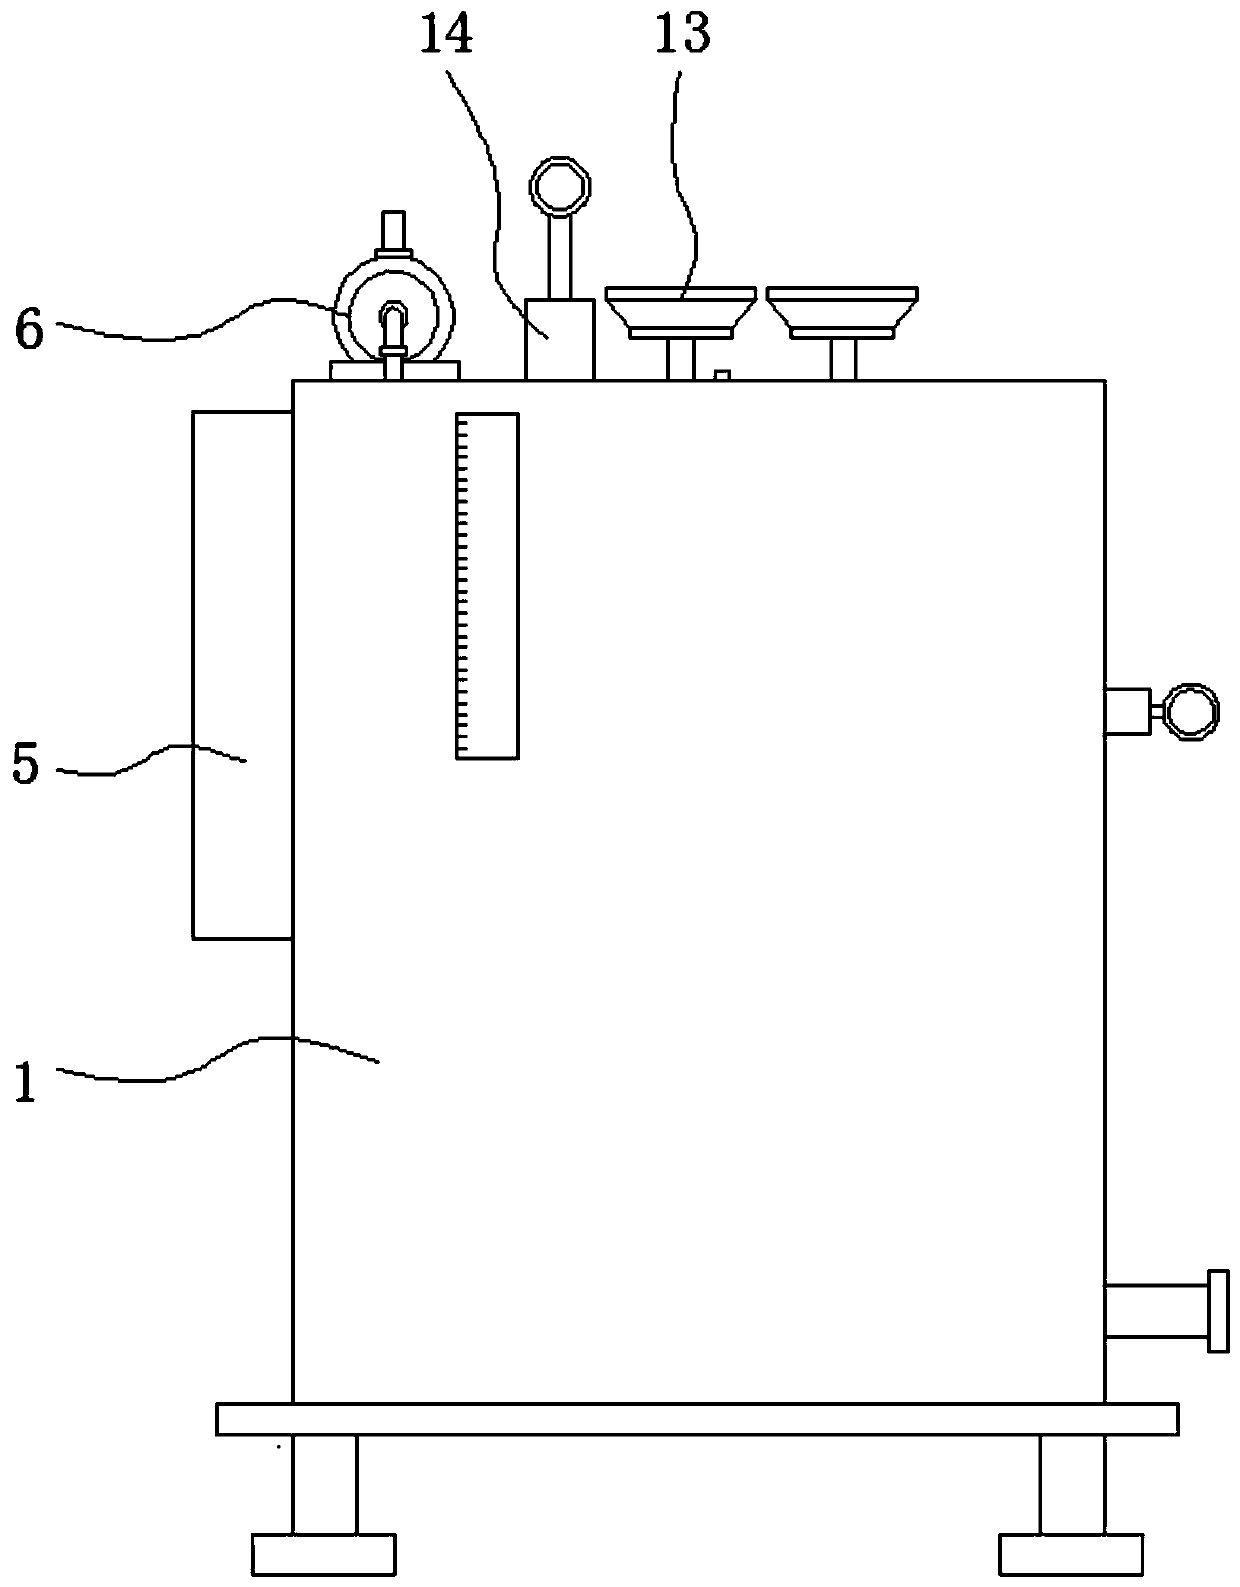 Fresh-keeping liquid for frozen food and preparation equipment thereof